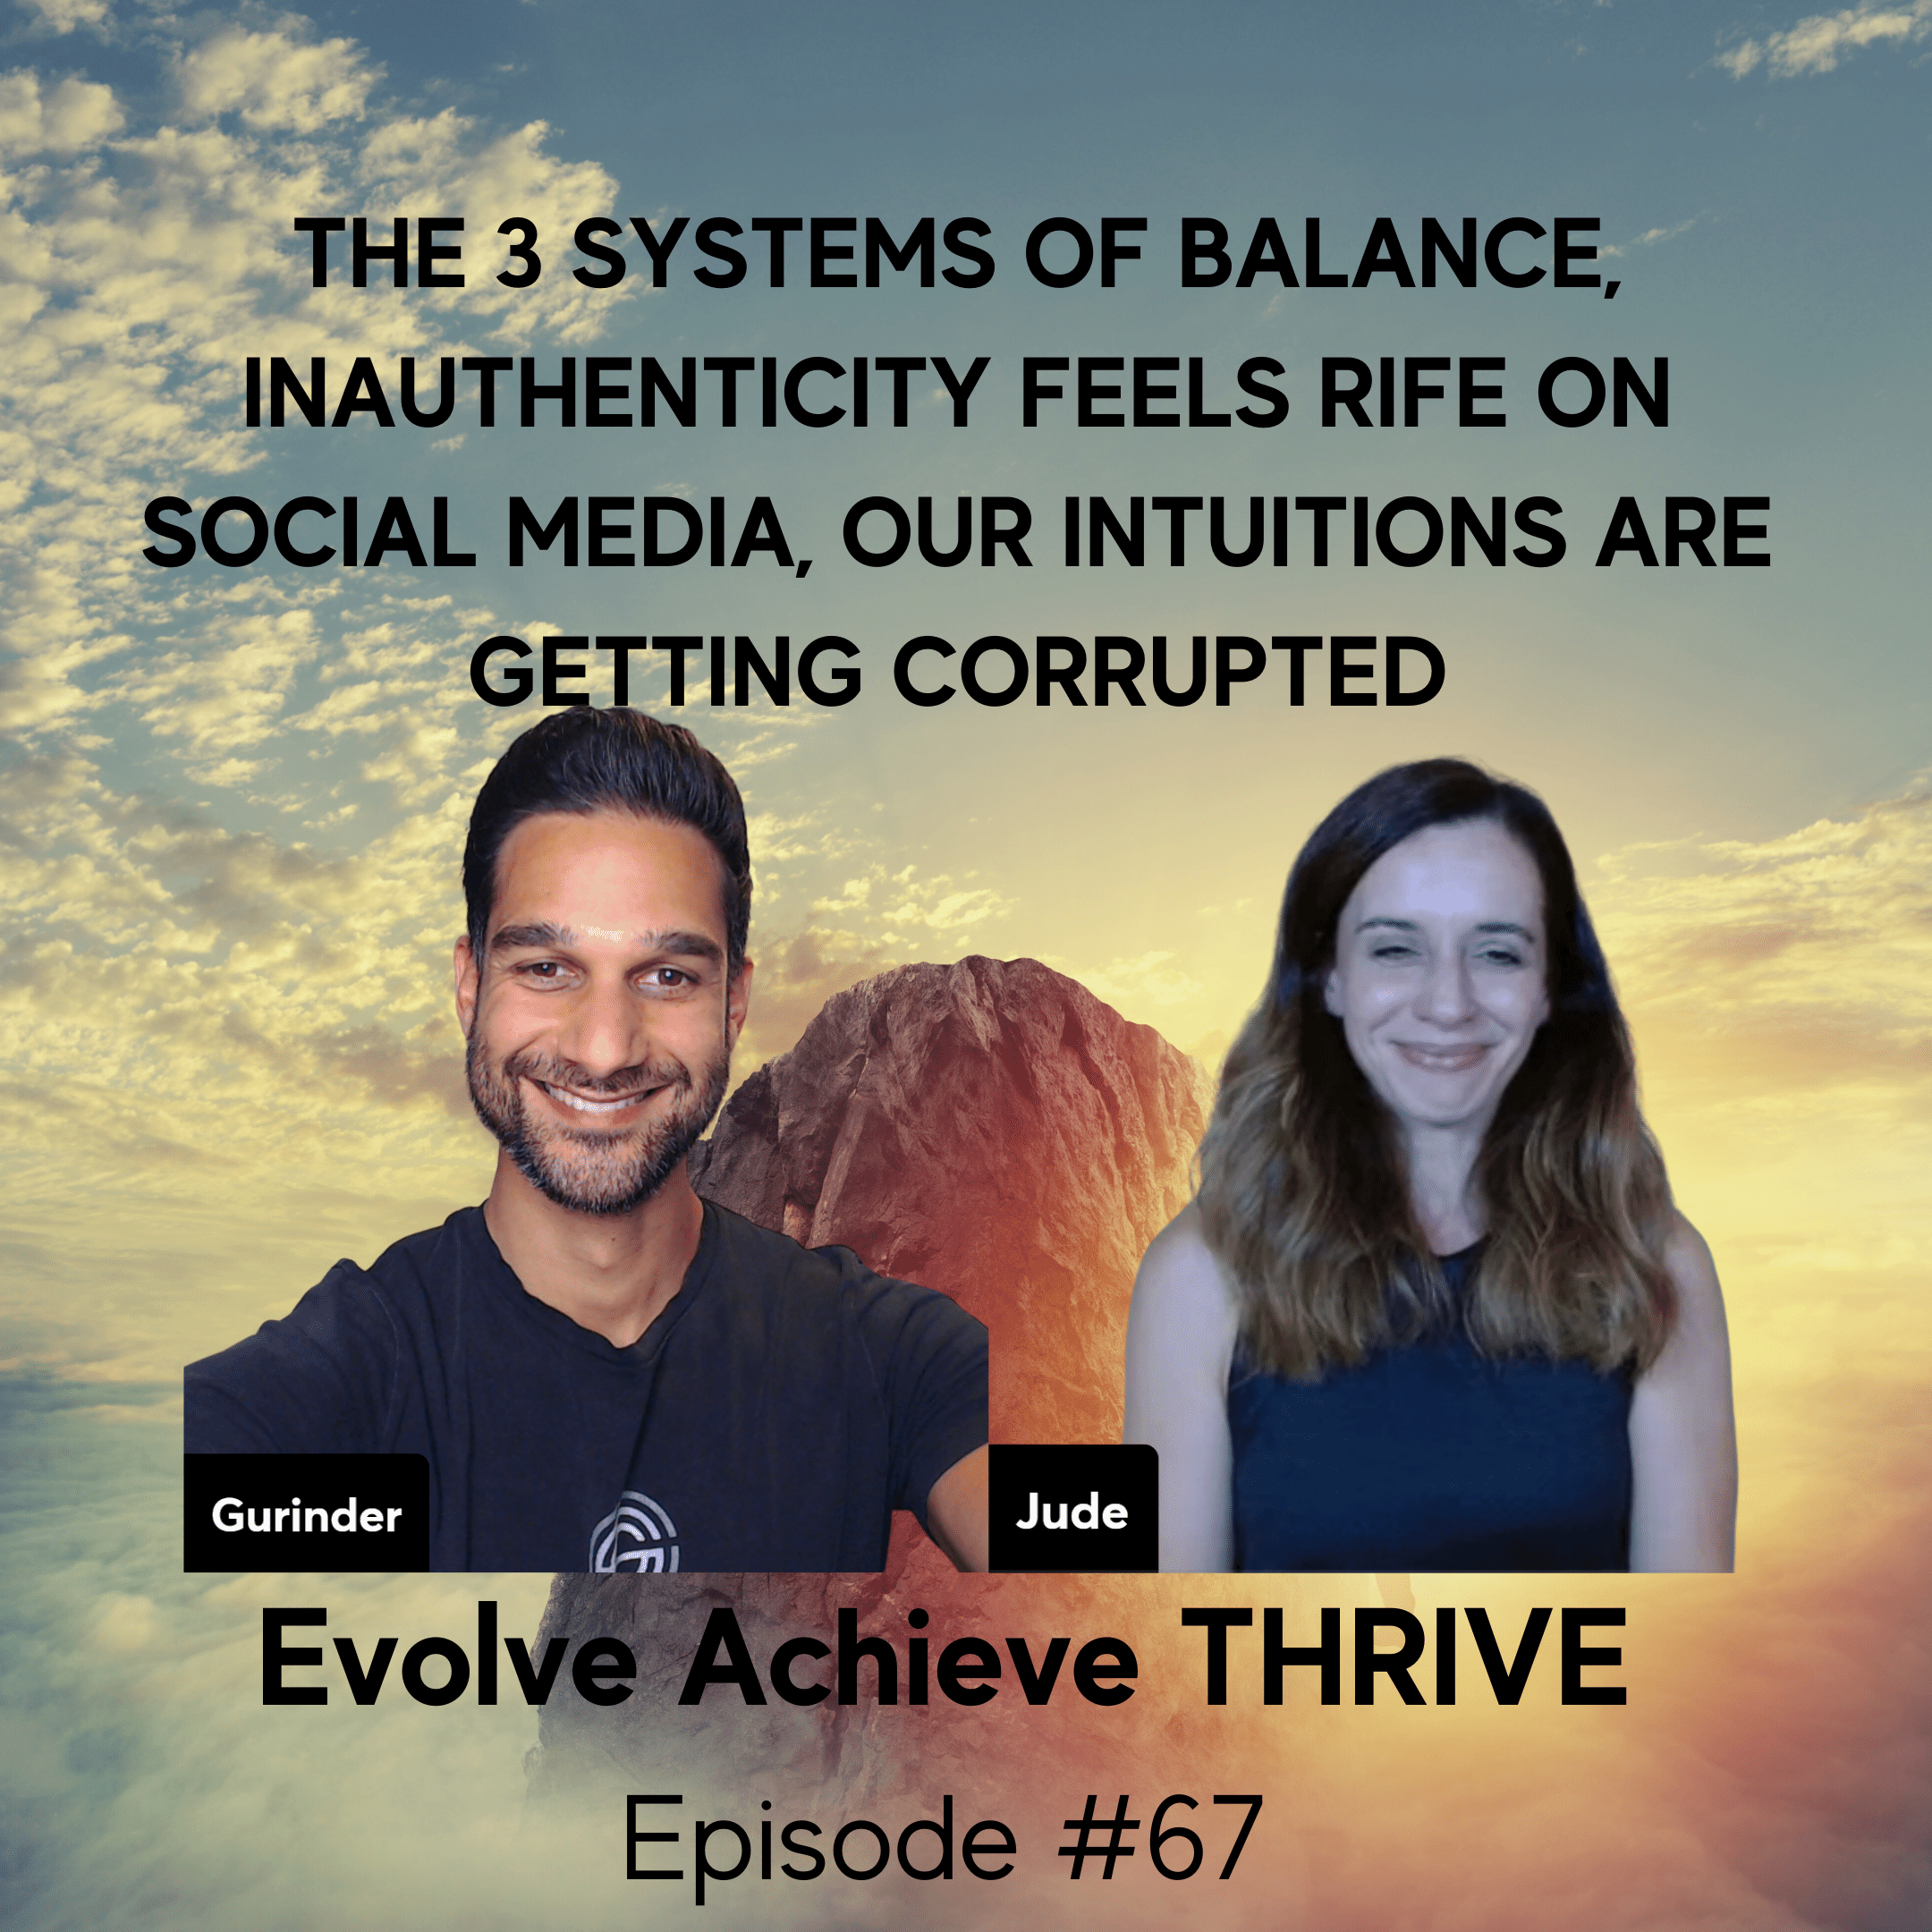 #67 The 3 Systems of Balance, Inauthenticity Feels Rife on Social Media, Our Intuitions Are Getting Corrupted